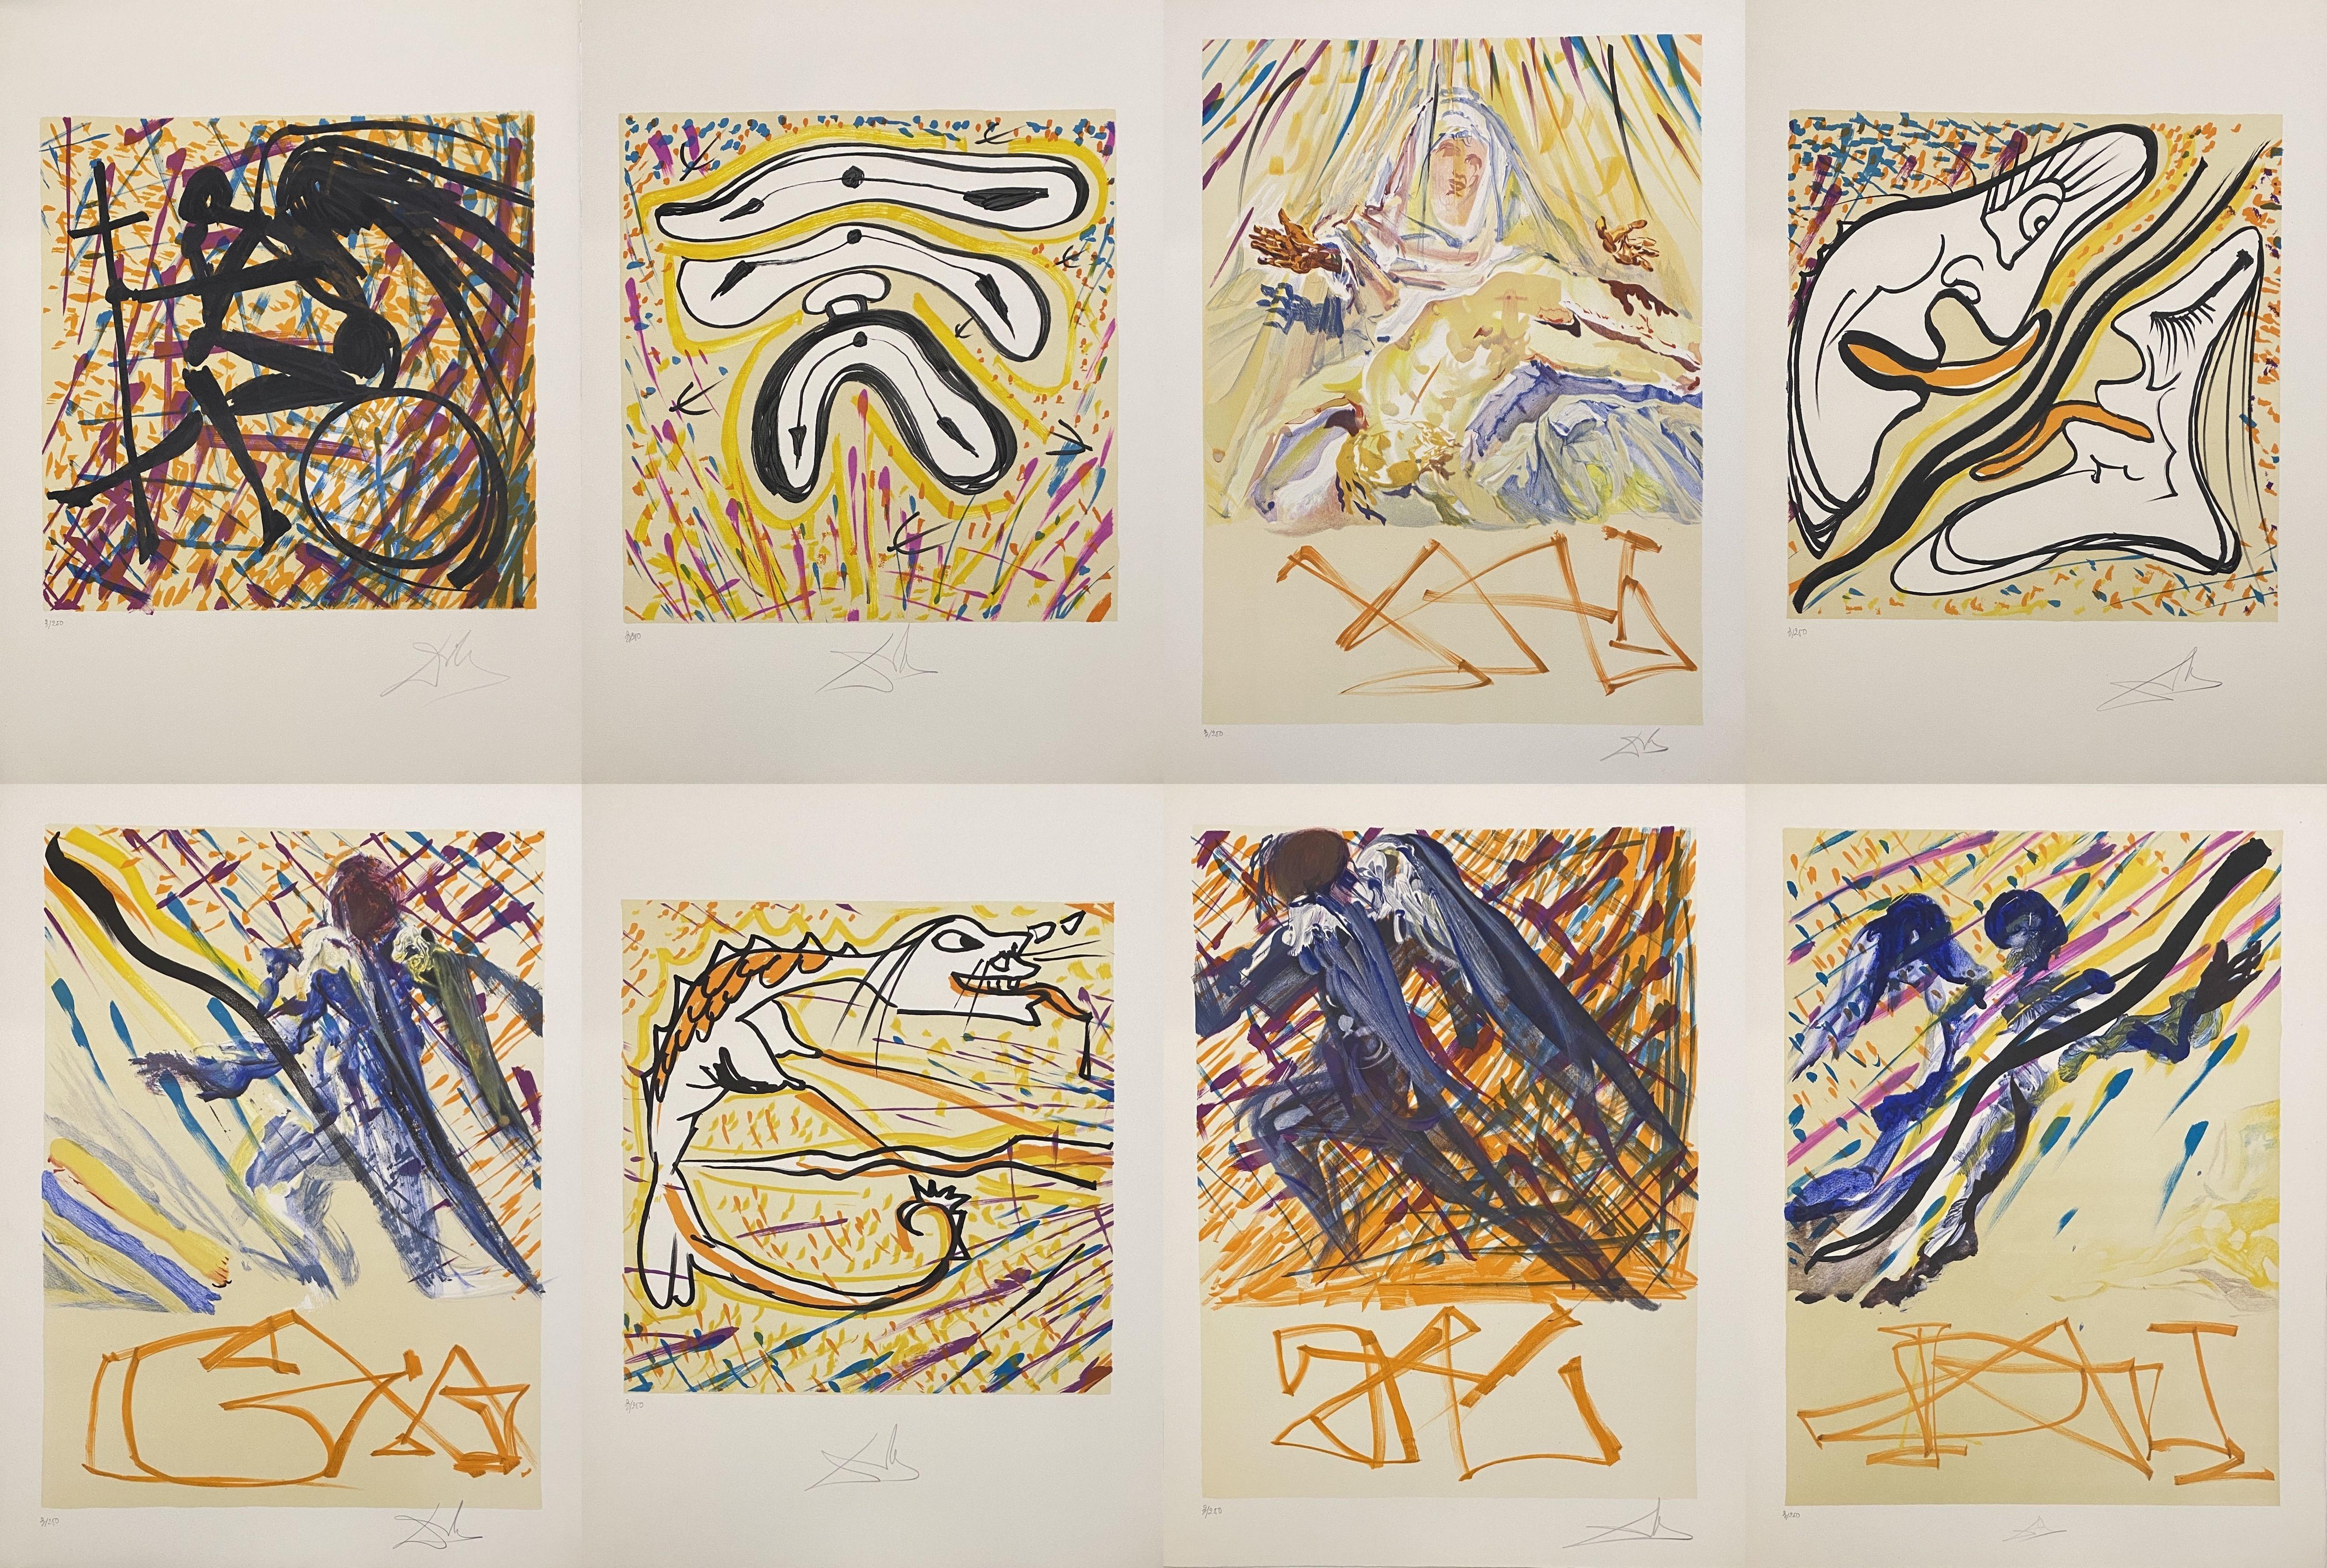 Vitraux - Complete Set of 24 Lithographs Hand Signed & /250 in Case (Field 74-5) - Print by Salvador Dalí